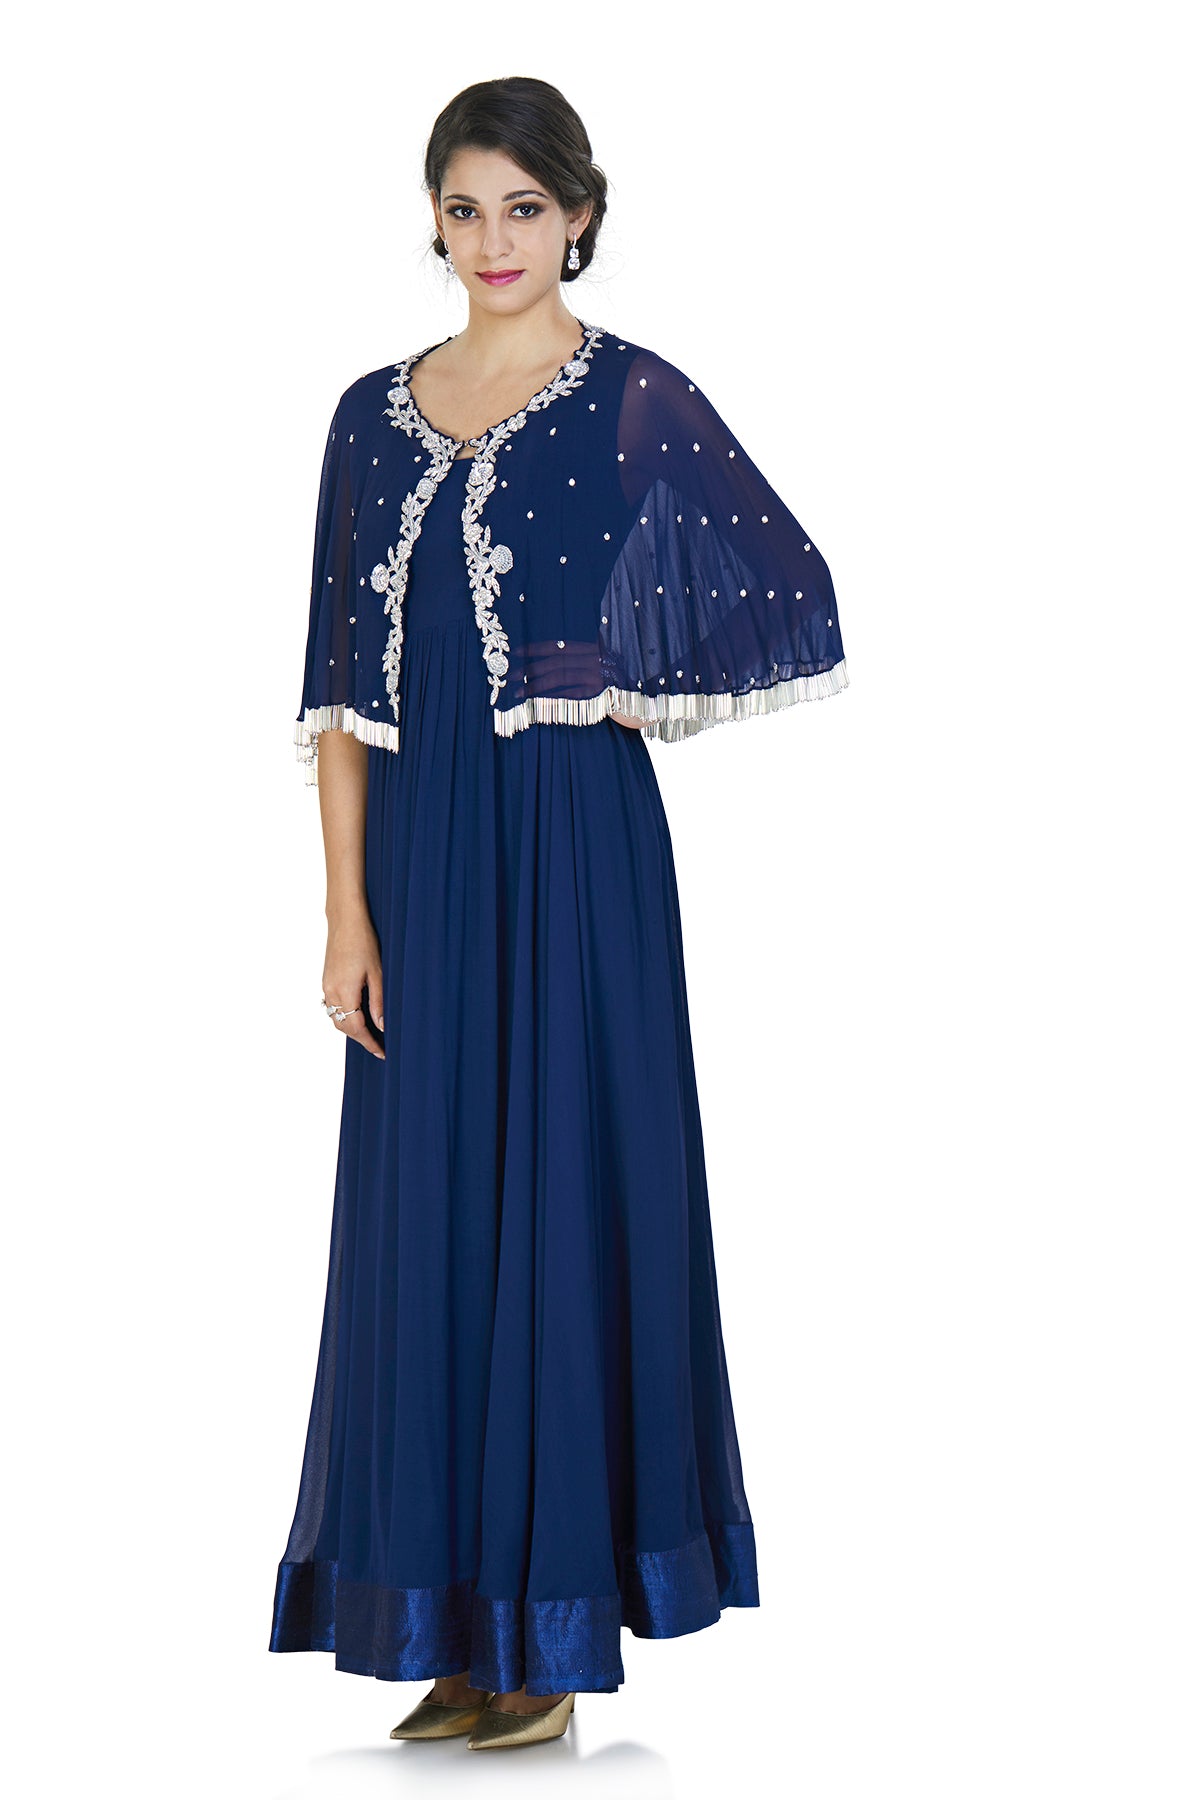 Dark blue georgette anarkali gown with a cape that is filled with intricate silver glass beads embroidery and tassels at the bottom.